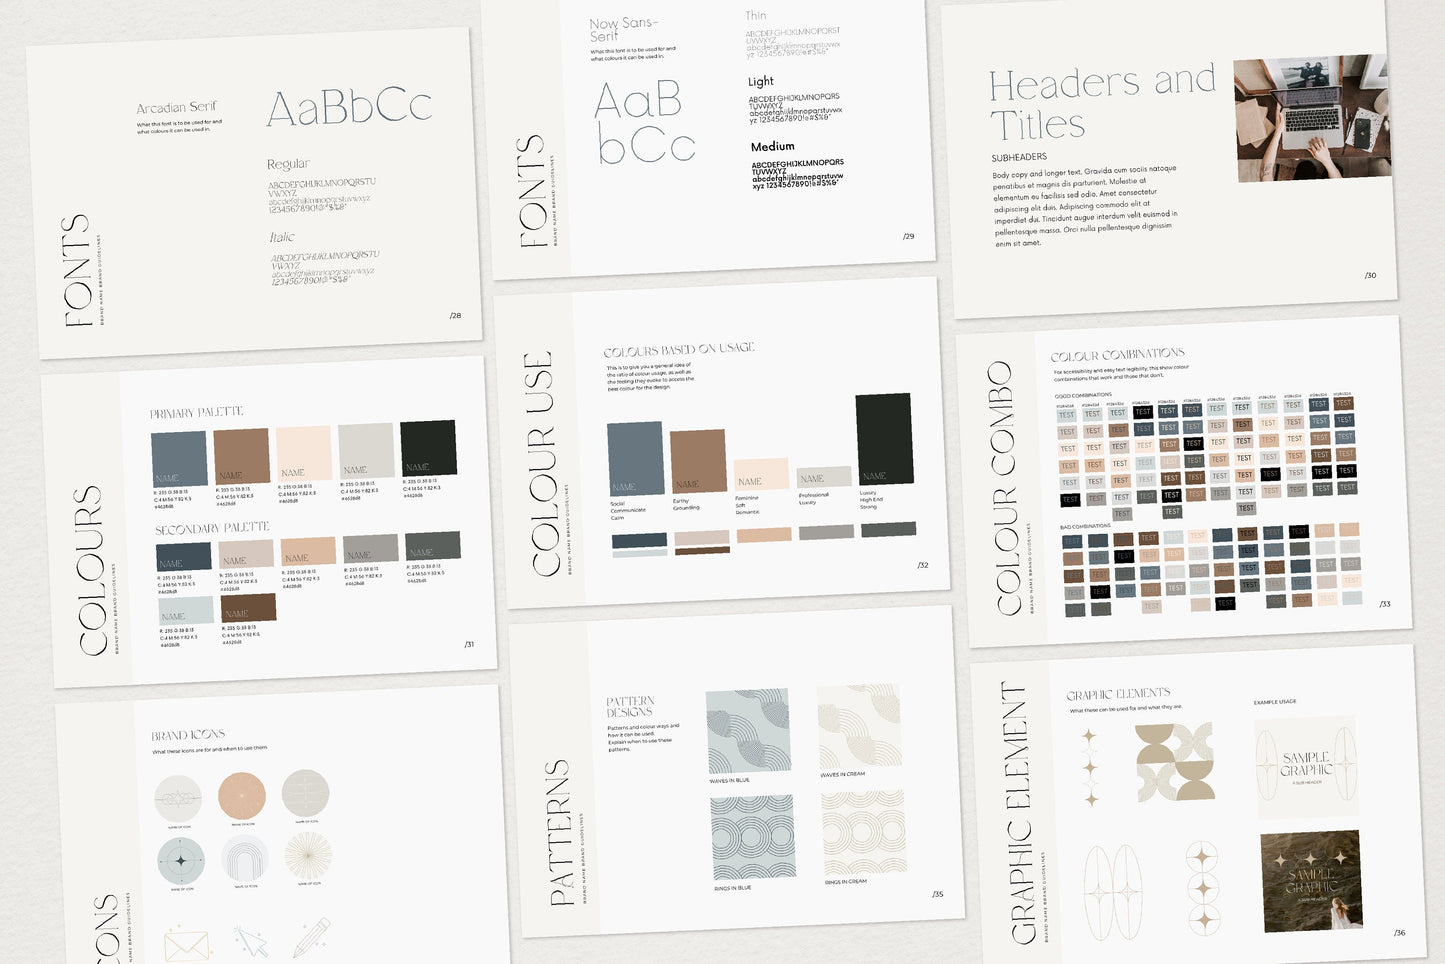 Brand Identity Style Guidelines Canva and InDesign Template (Digital Download)